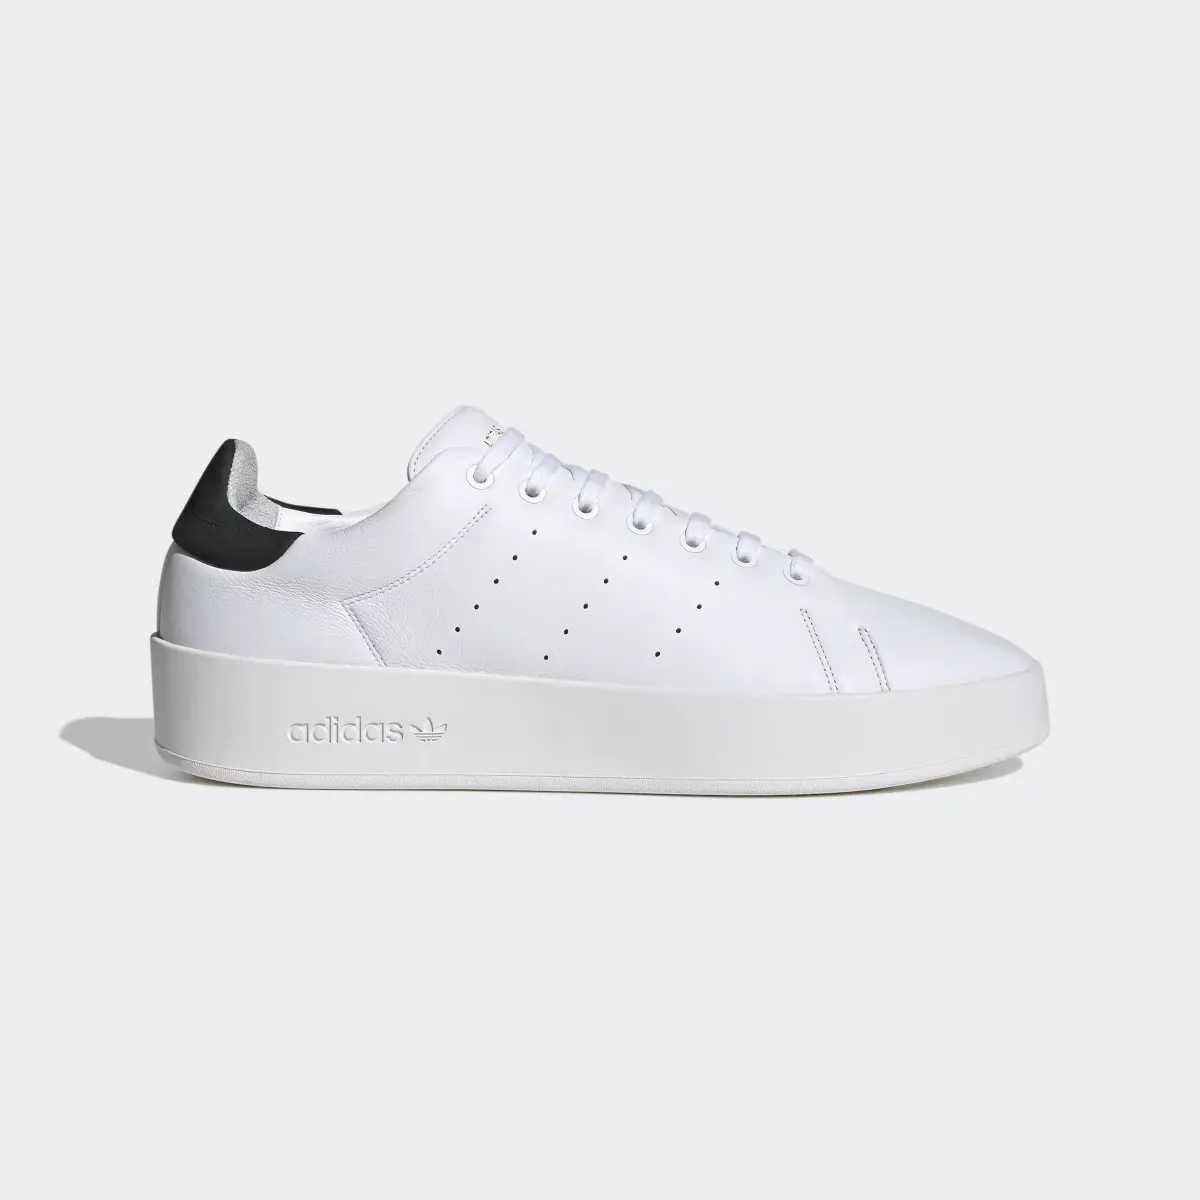 Adidas Chaussure Stan Smith Recon. 2